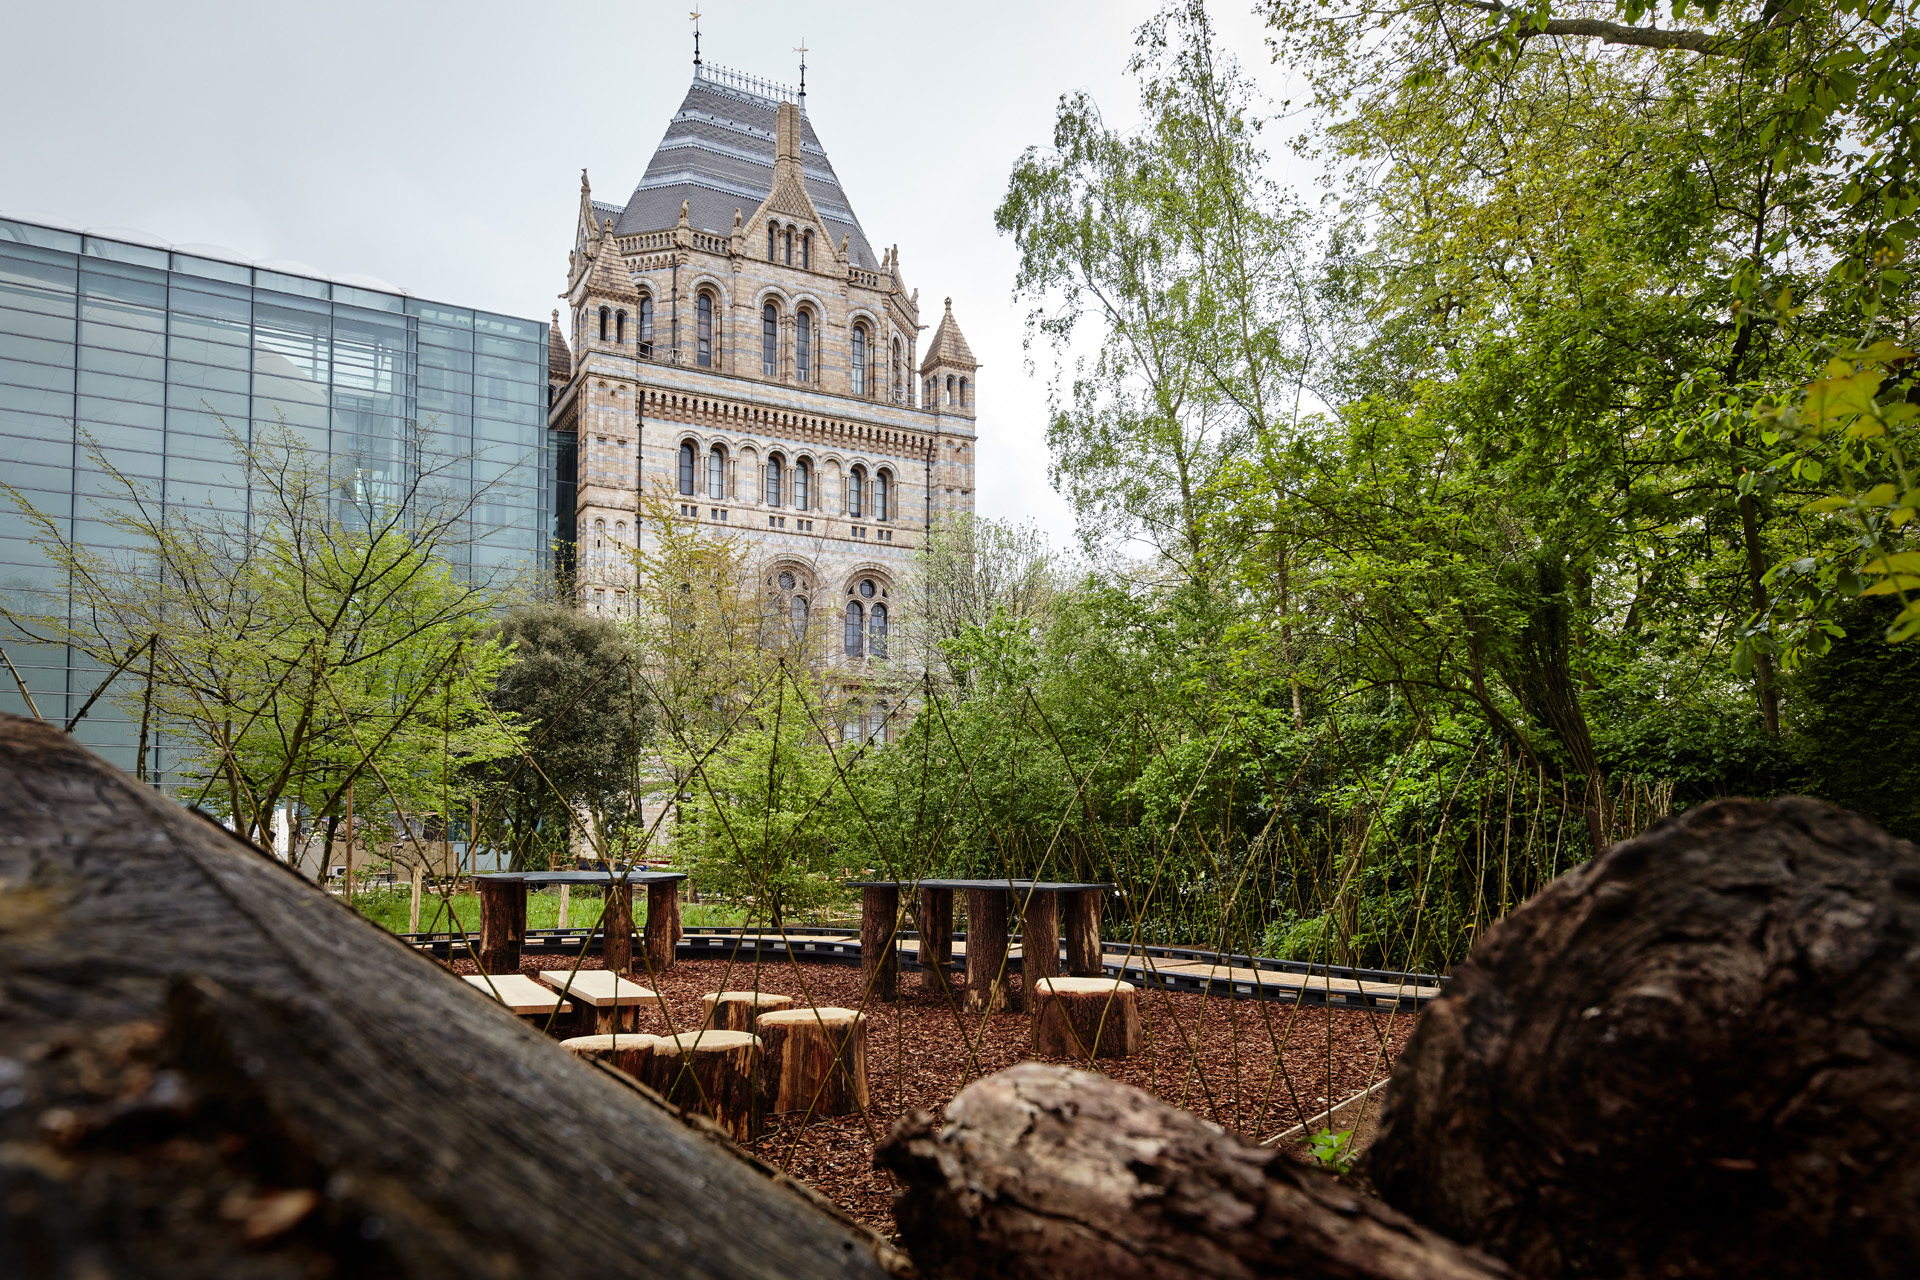 The Natural History Museum’s newly transformed gardens will provide visitors with a new outdoor space to rest, relax and connect with nature